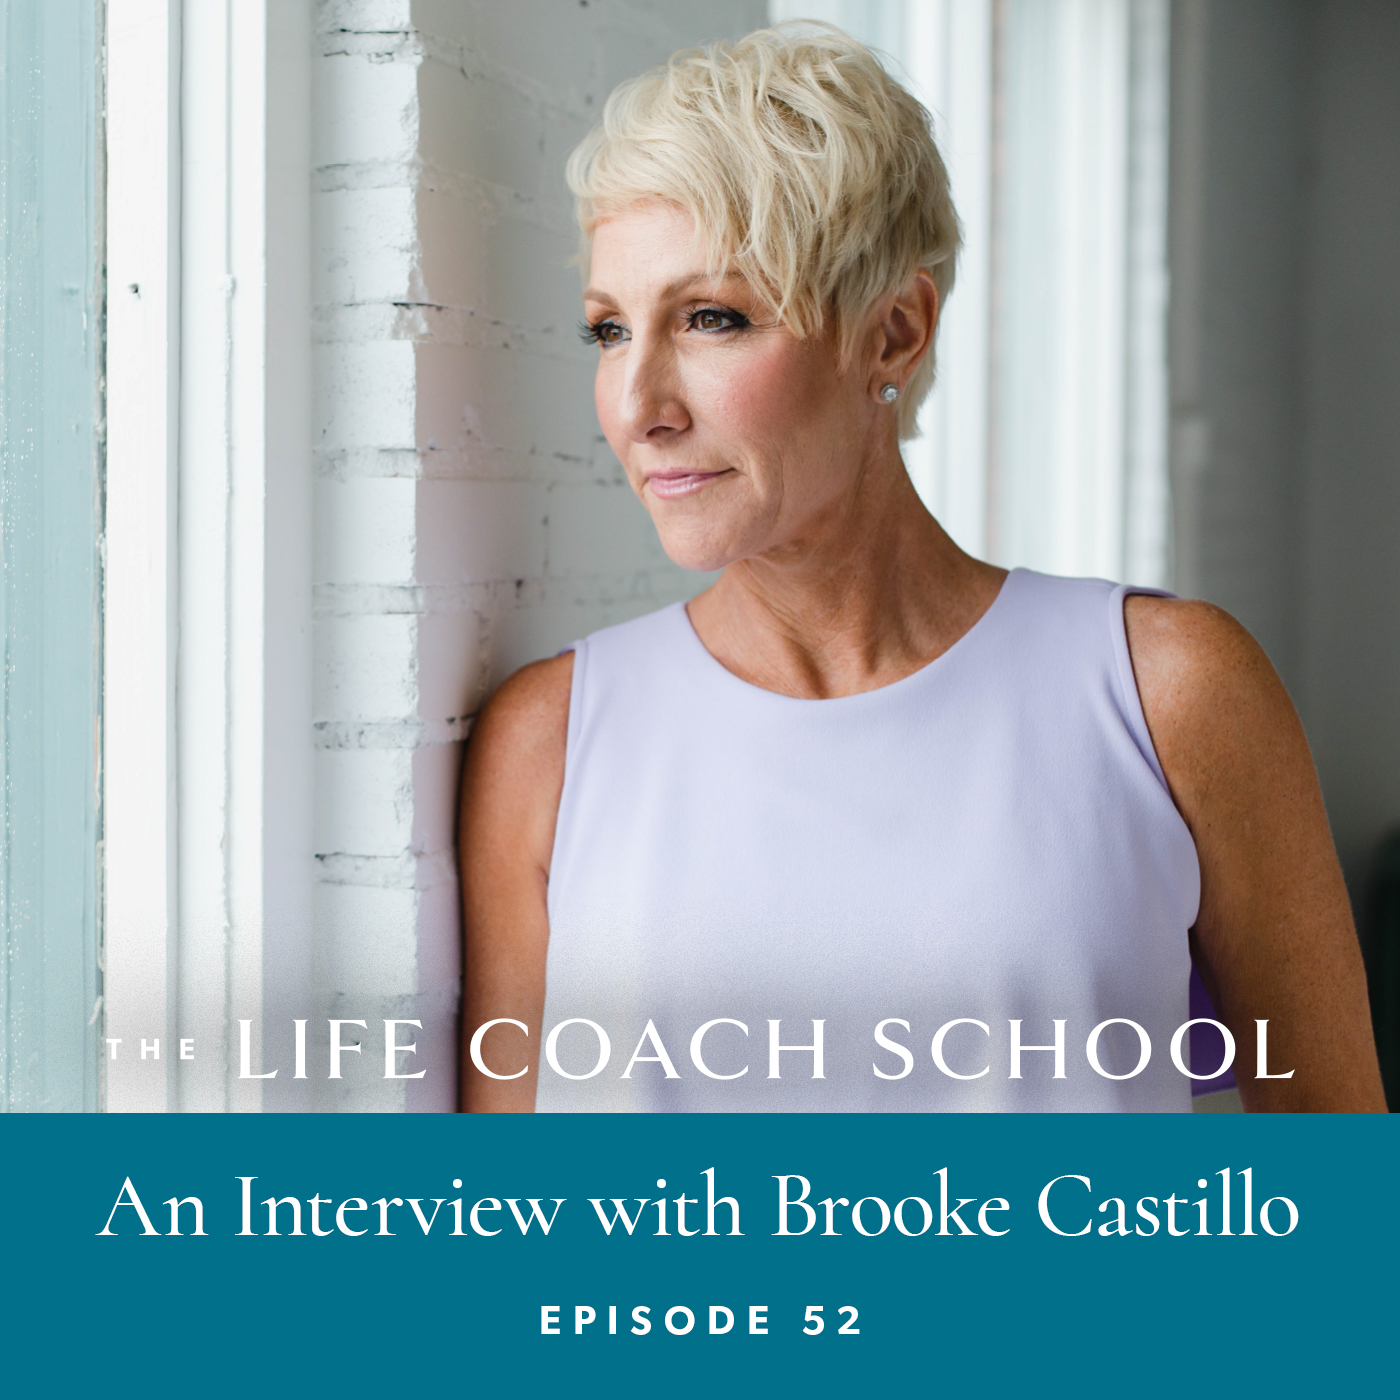 The Life Coach School Podcast with Brooke Castillo | Episode 52 | An Interview with Brooke Castillo